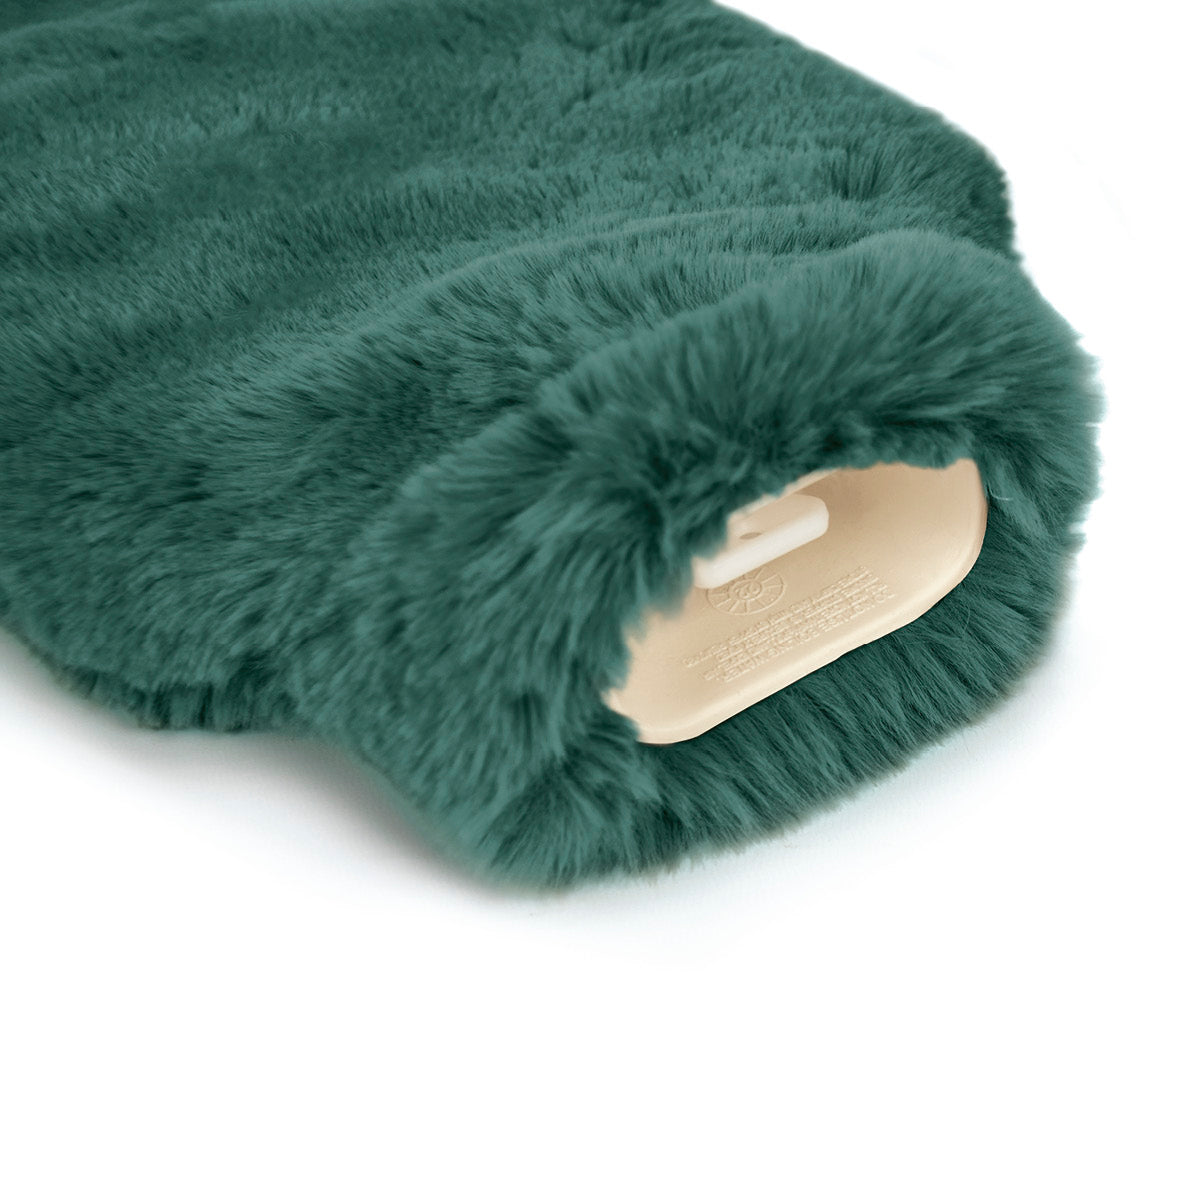 Hot water bottle with cover  Green - 20 x 33 cm